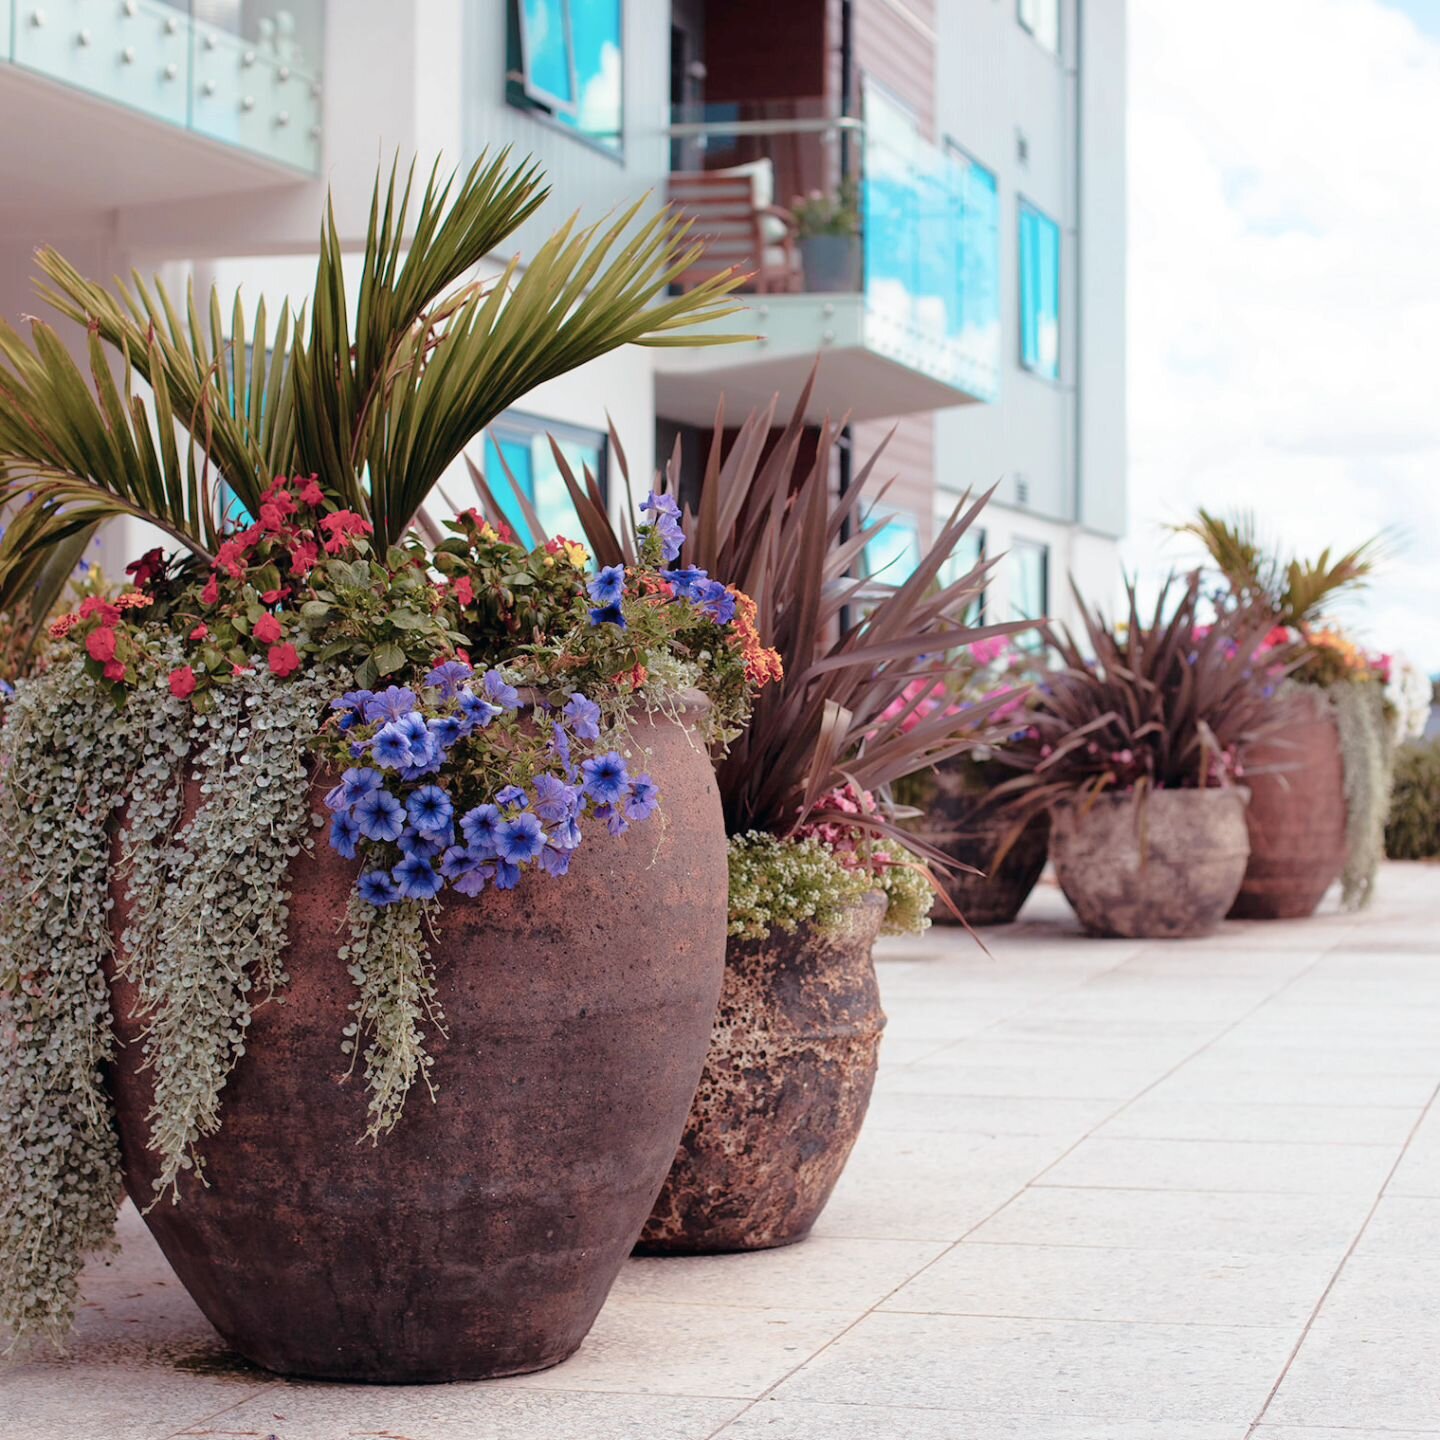 We are loving these overflowing pots- and so is the client!

#commerciallandscaping #commercialgarden #commercialgardening #plantsmakepeoplehappy #plantlovers #gardensnz #gardens #gardening #gardenlove #gardenersofinstagram #gardenerslife #potsandpla